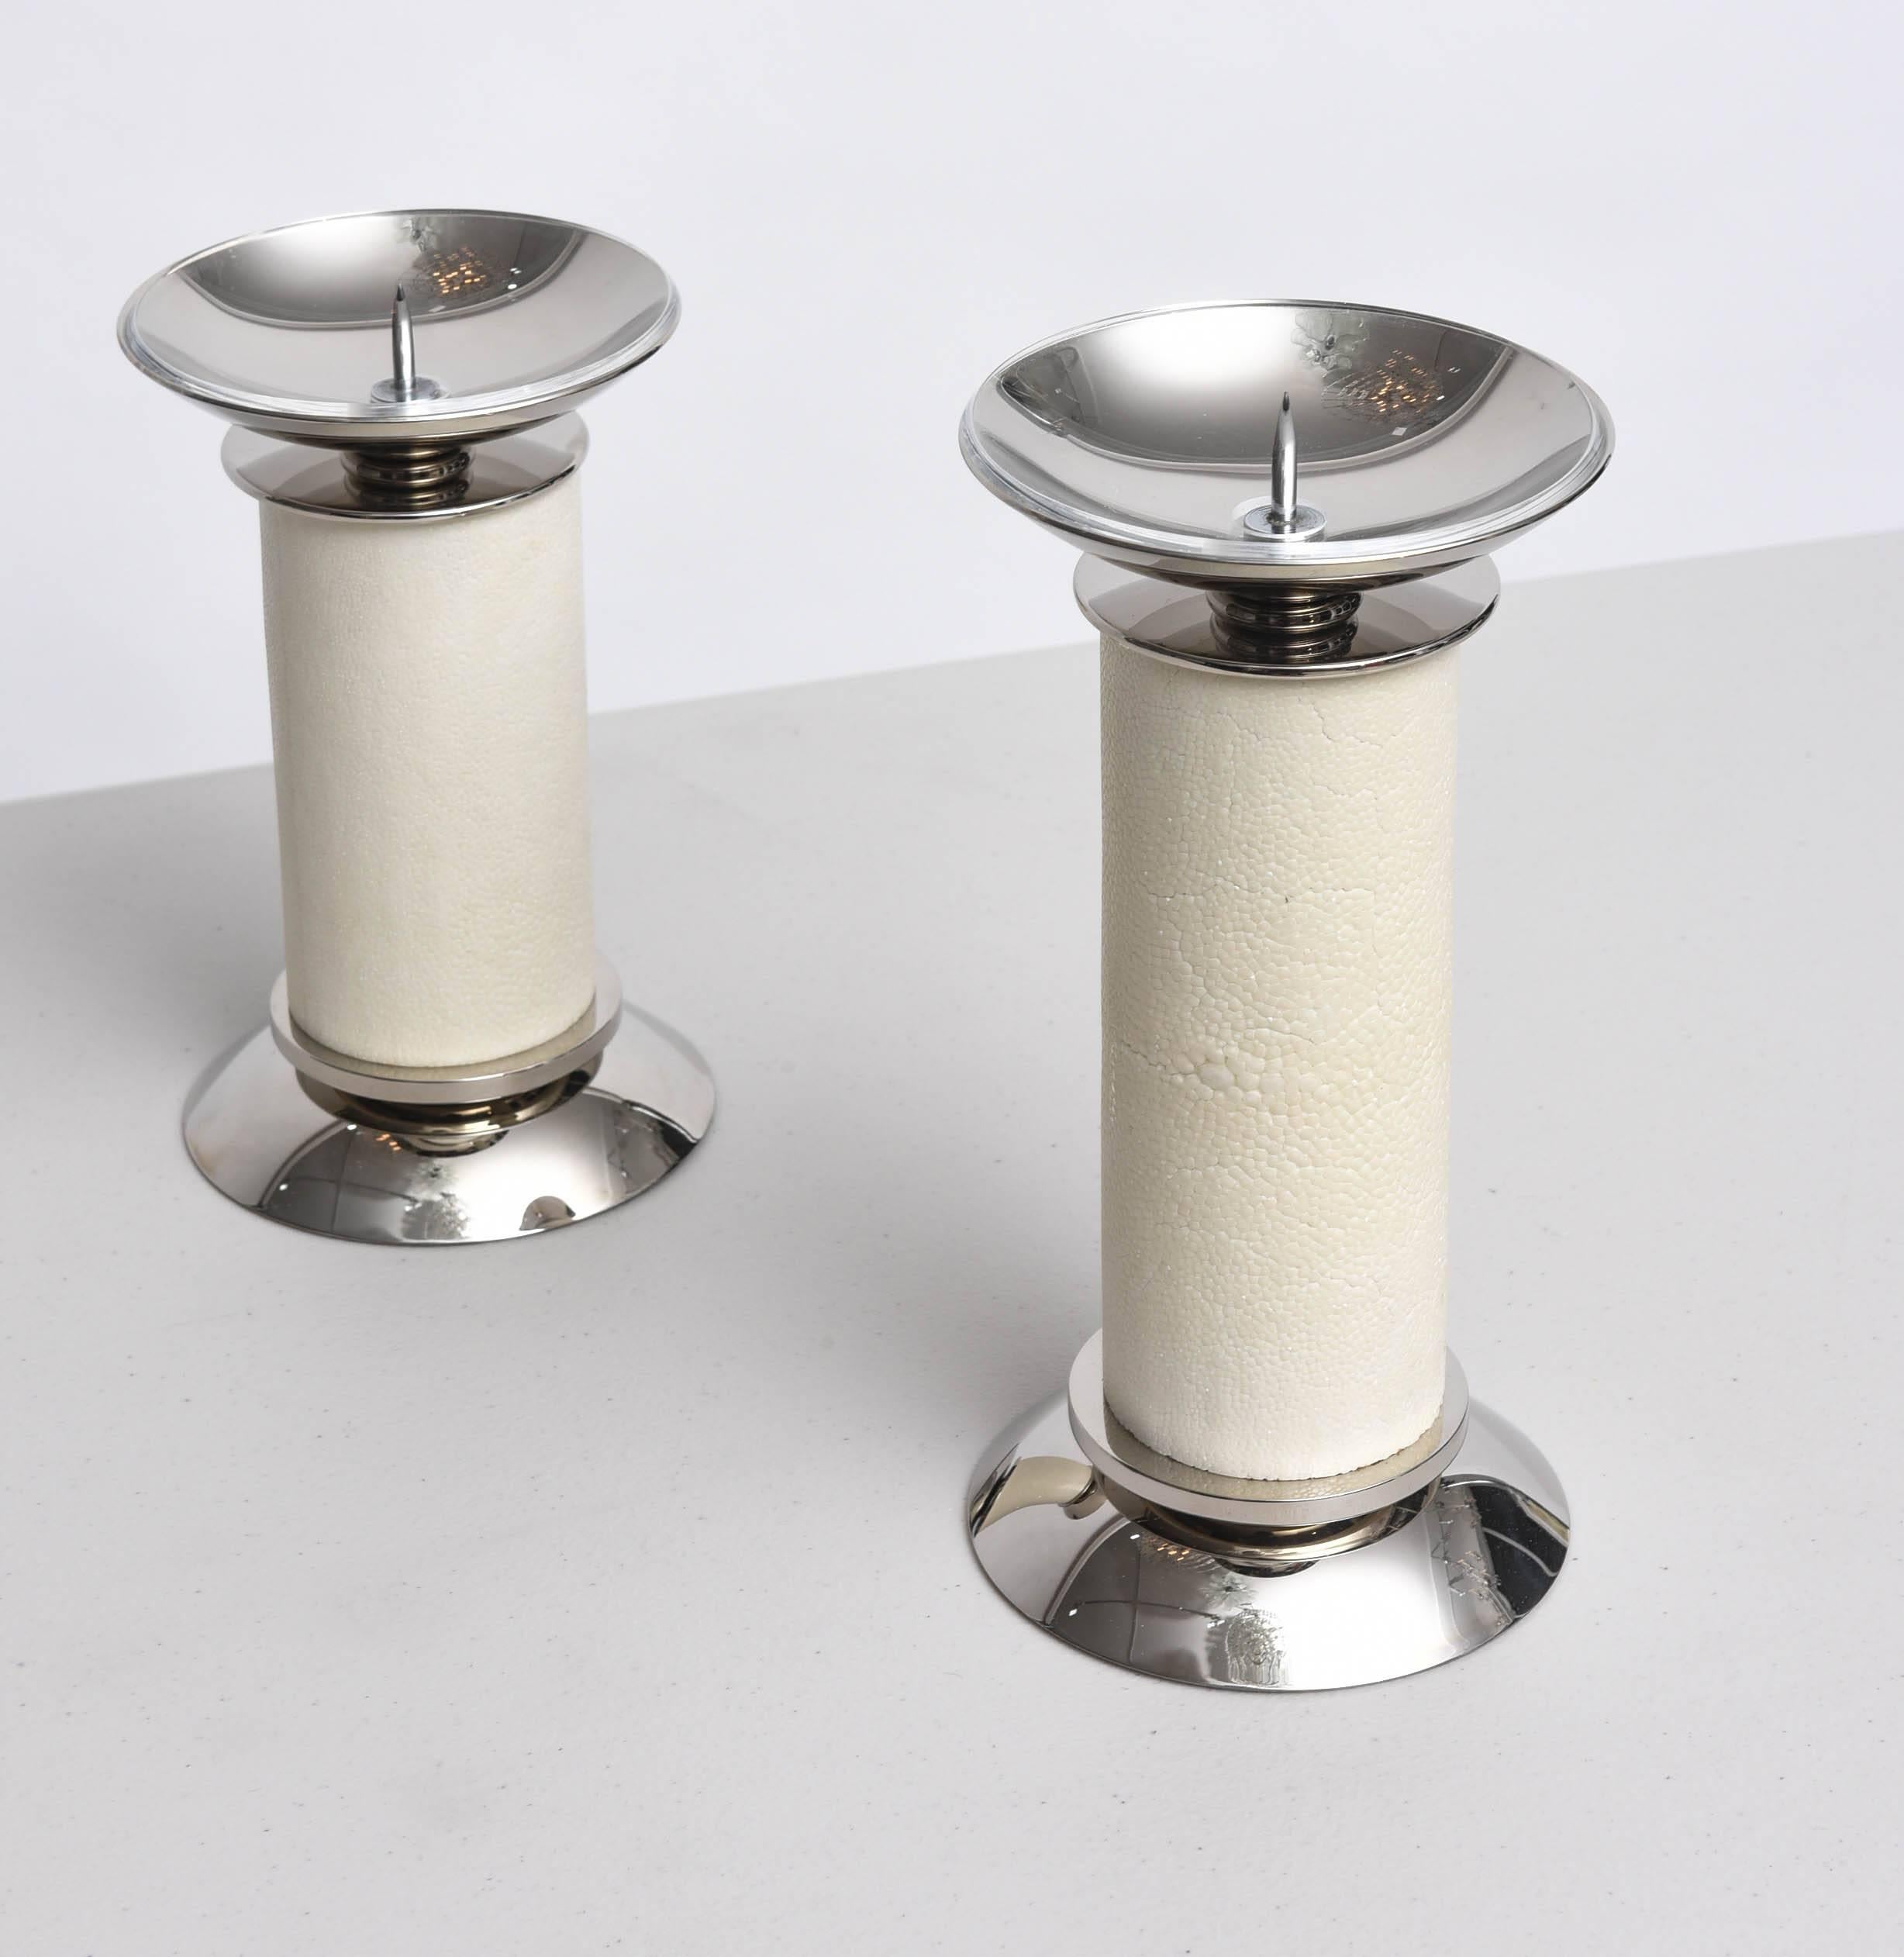 Two Piece Set of Karl Springer Candlesticks Ivory Shagreen and Nickel-Plated  1